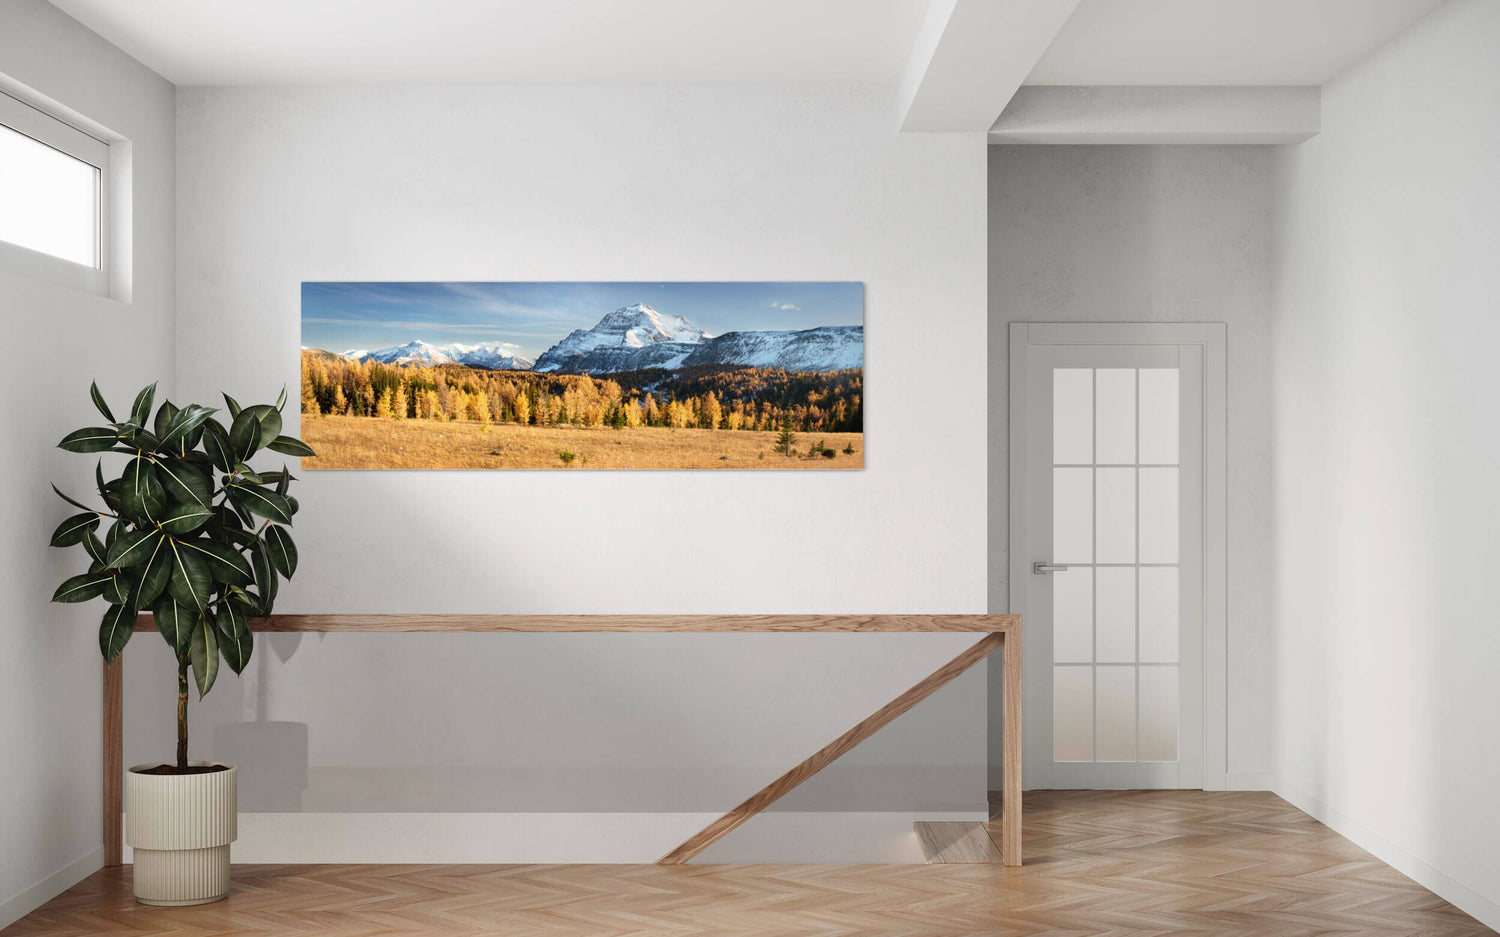 A picture of the golden larches on Healy Pass in Banff hangs in an entryway.